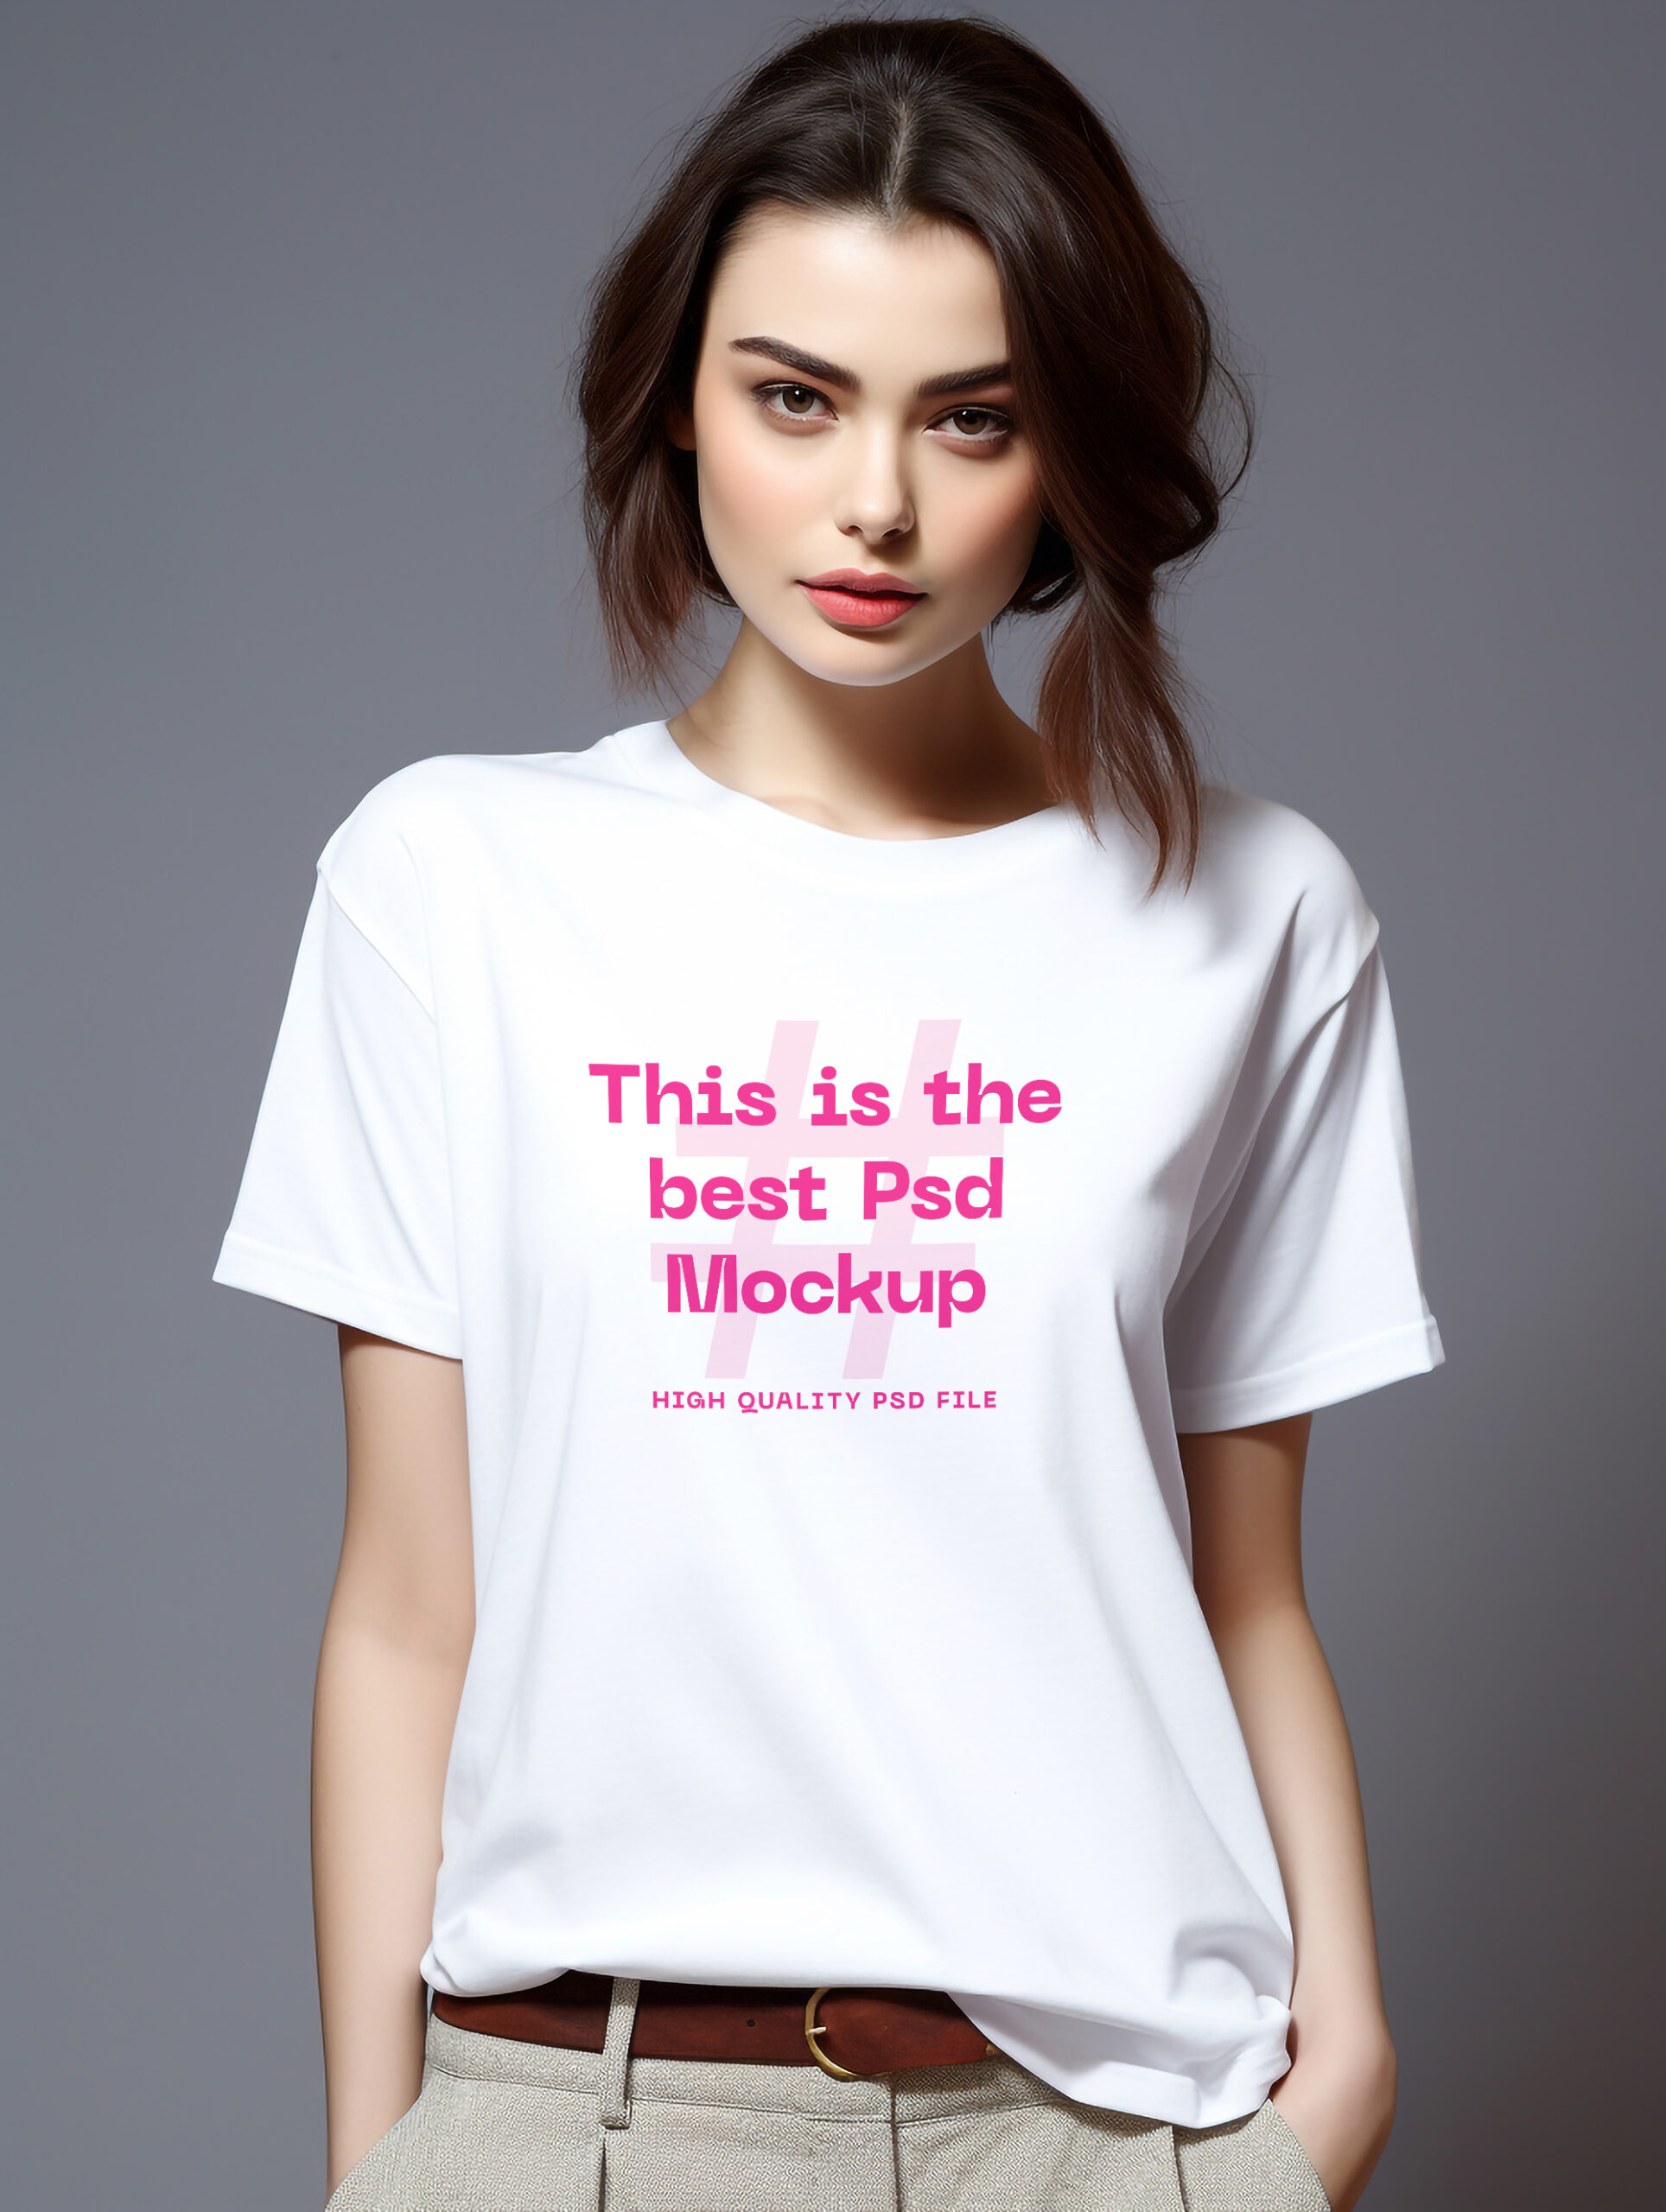 Free Download Female front view t-shirt template